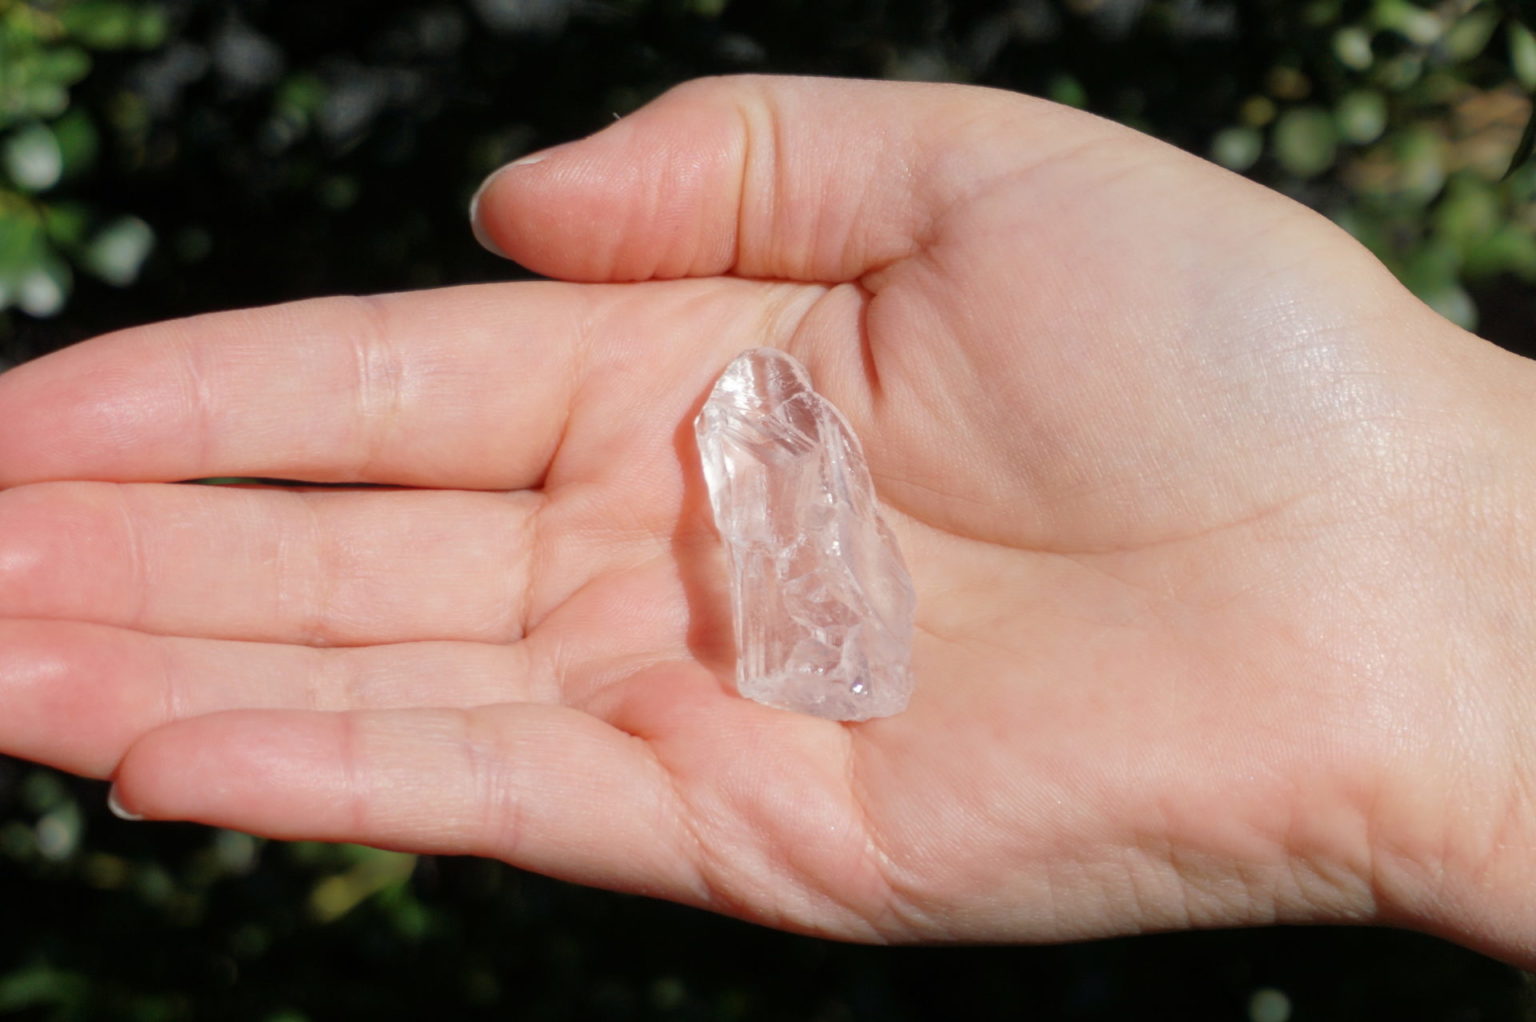 pure-ray-lemurian-roots09